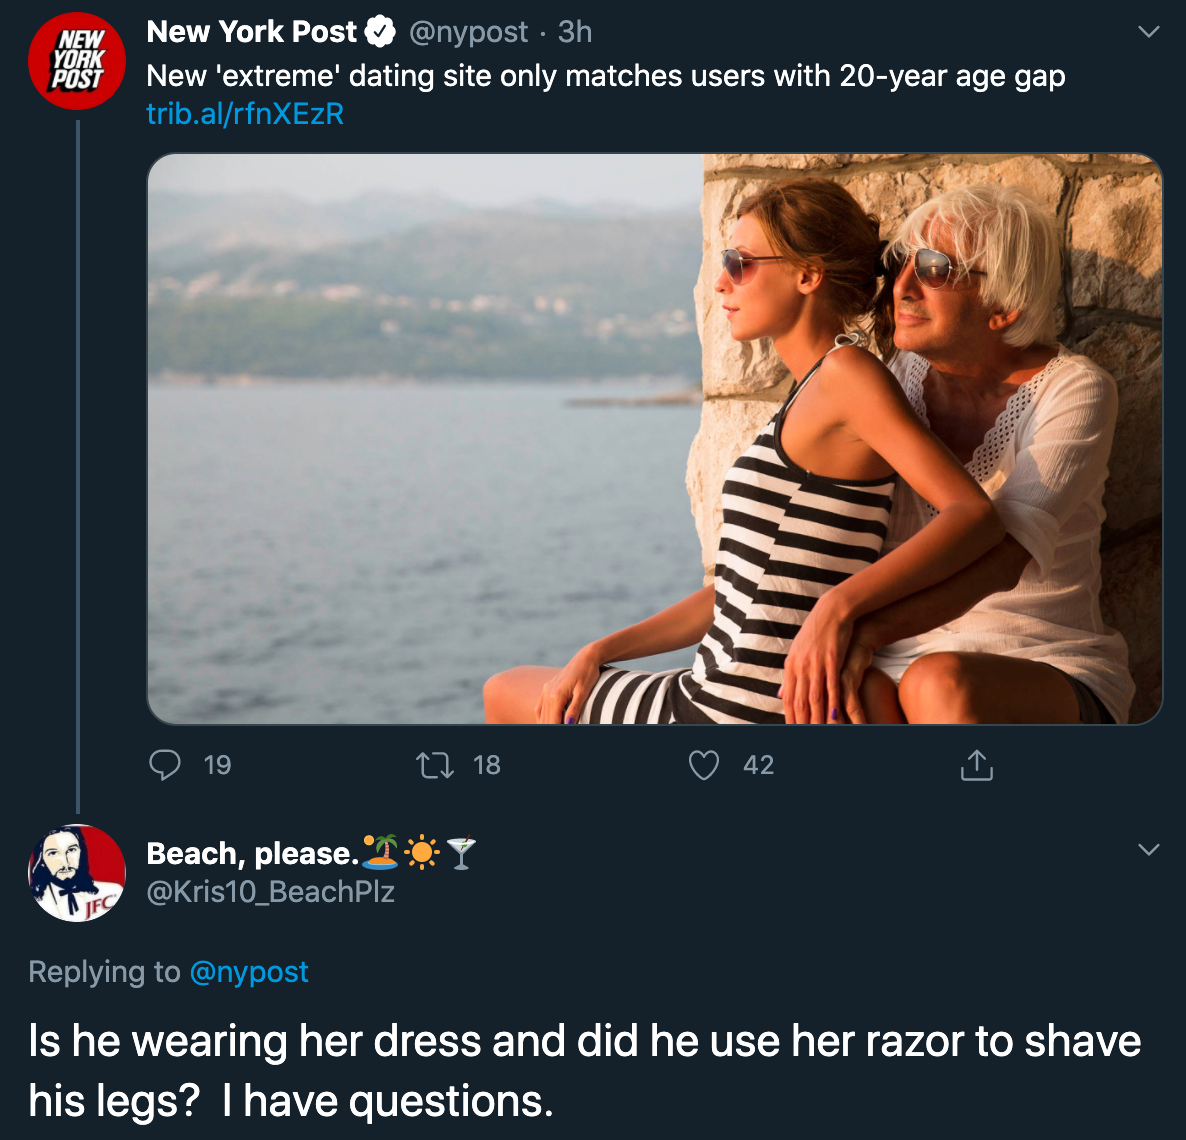 New 'extreme' dating site only matches users with 20year age gap - Is he wearing her dress and did he use her razor to shave his legs? I have questions.